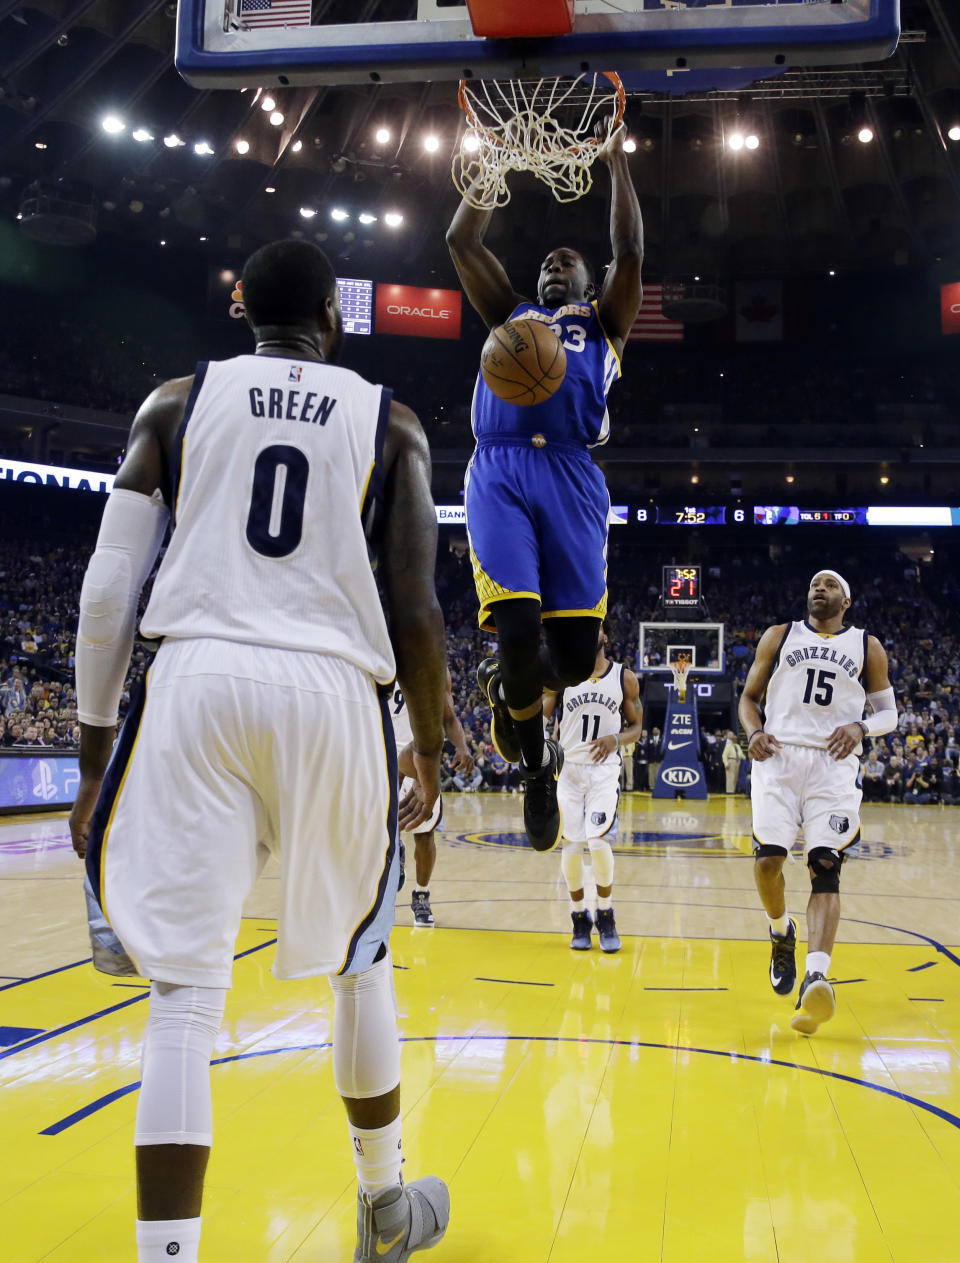 Golden State Warriors' Draymond Green, top, dunks past Memphis Grizzlies' JaMychal Green (0) and Vince Carter (15) during the first half of an NBA basketball game Sunday, March 26, 2017, in Oakland, Calif. (AP Photo/Marcio Jose Sanchez)